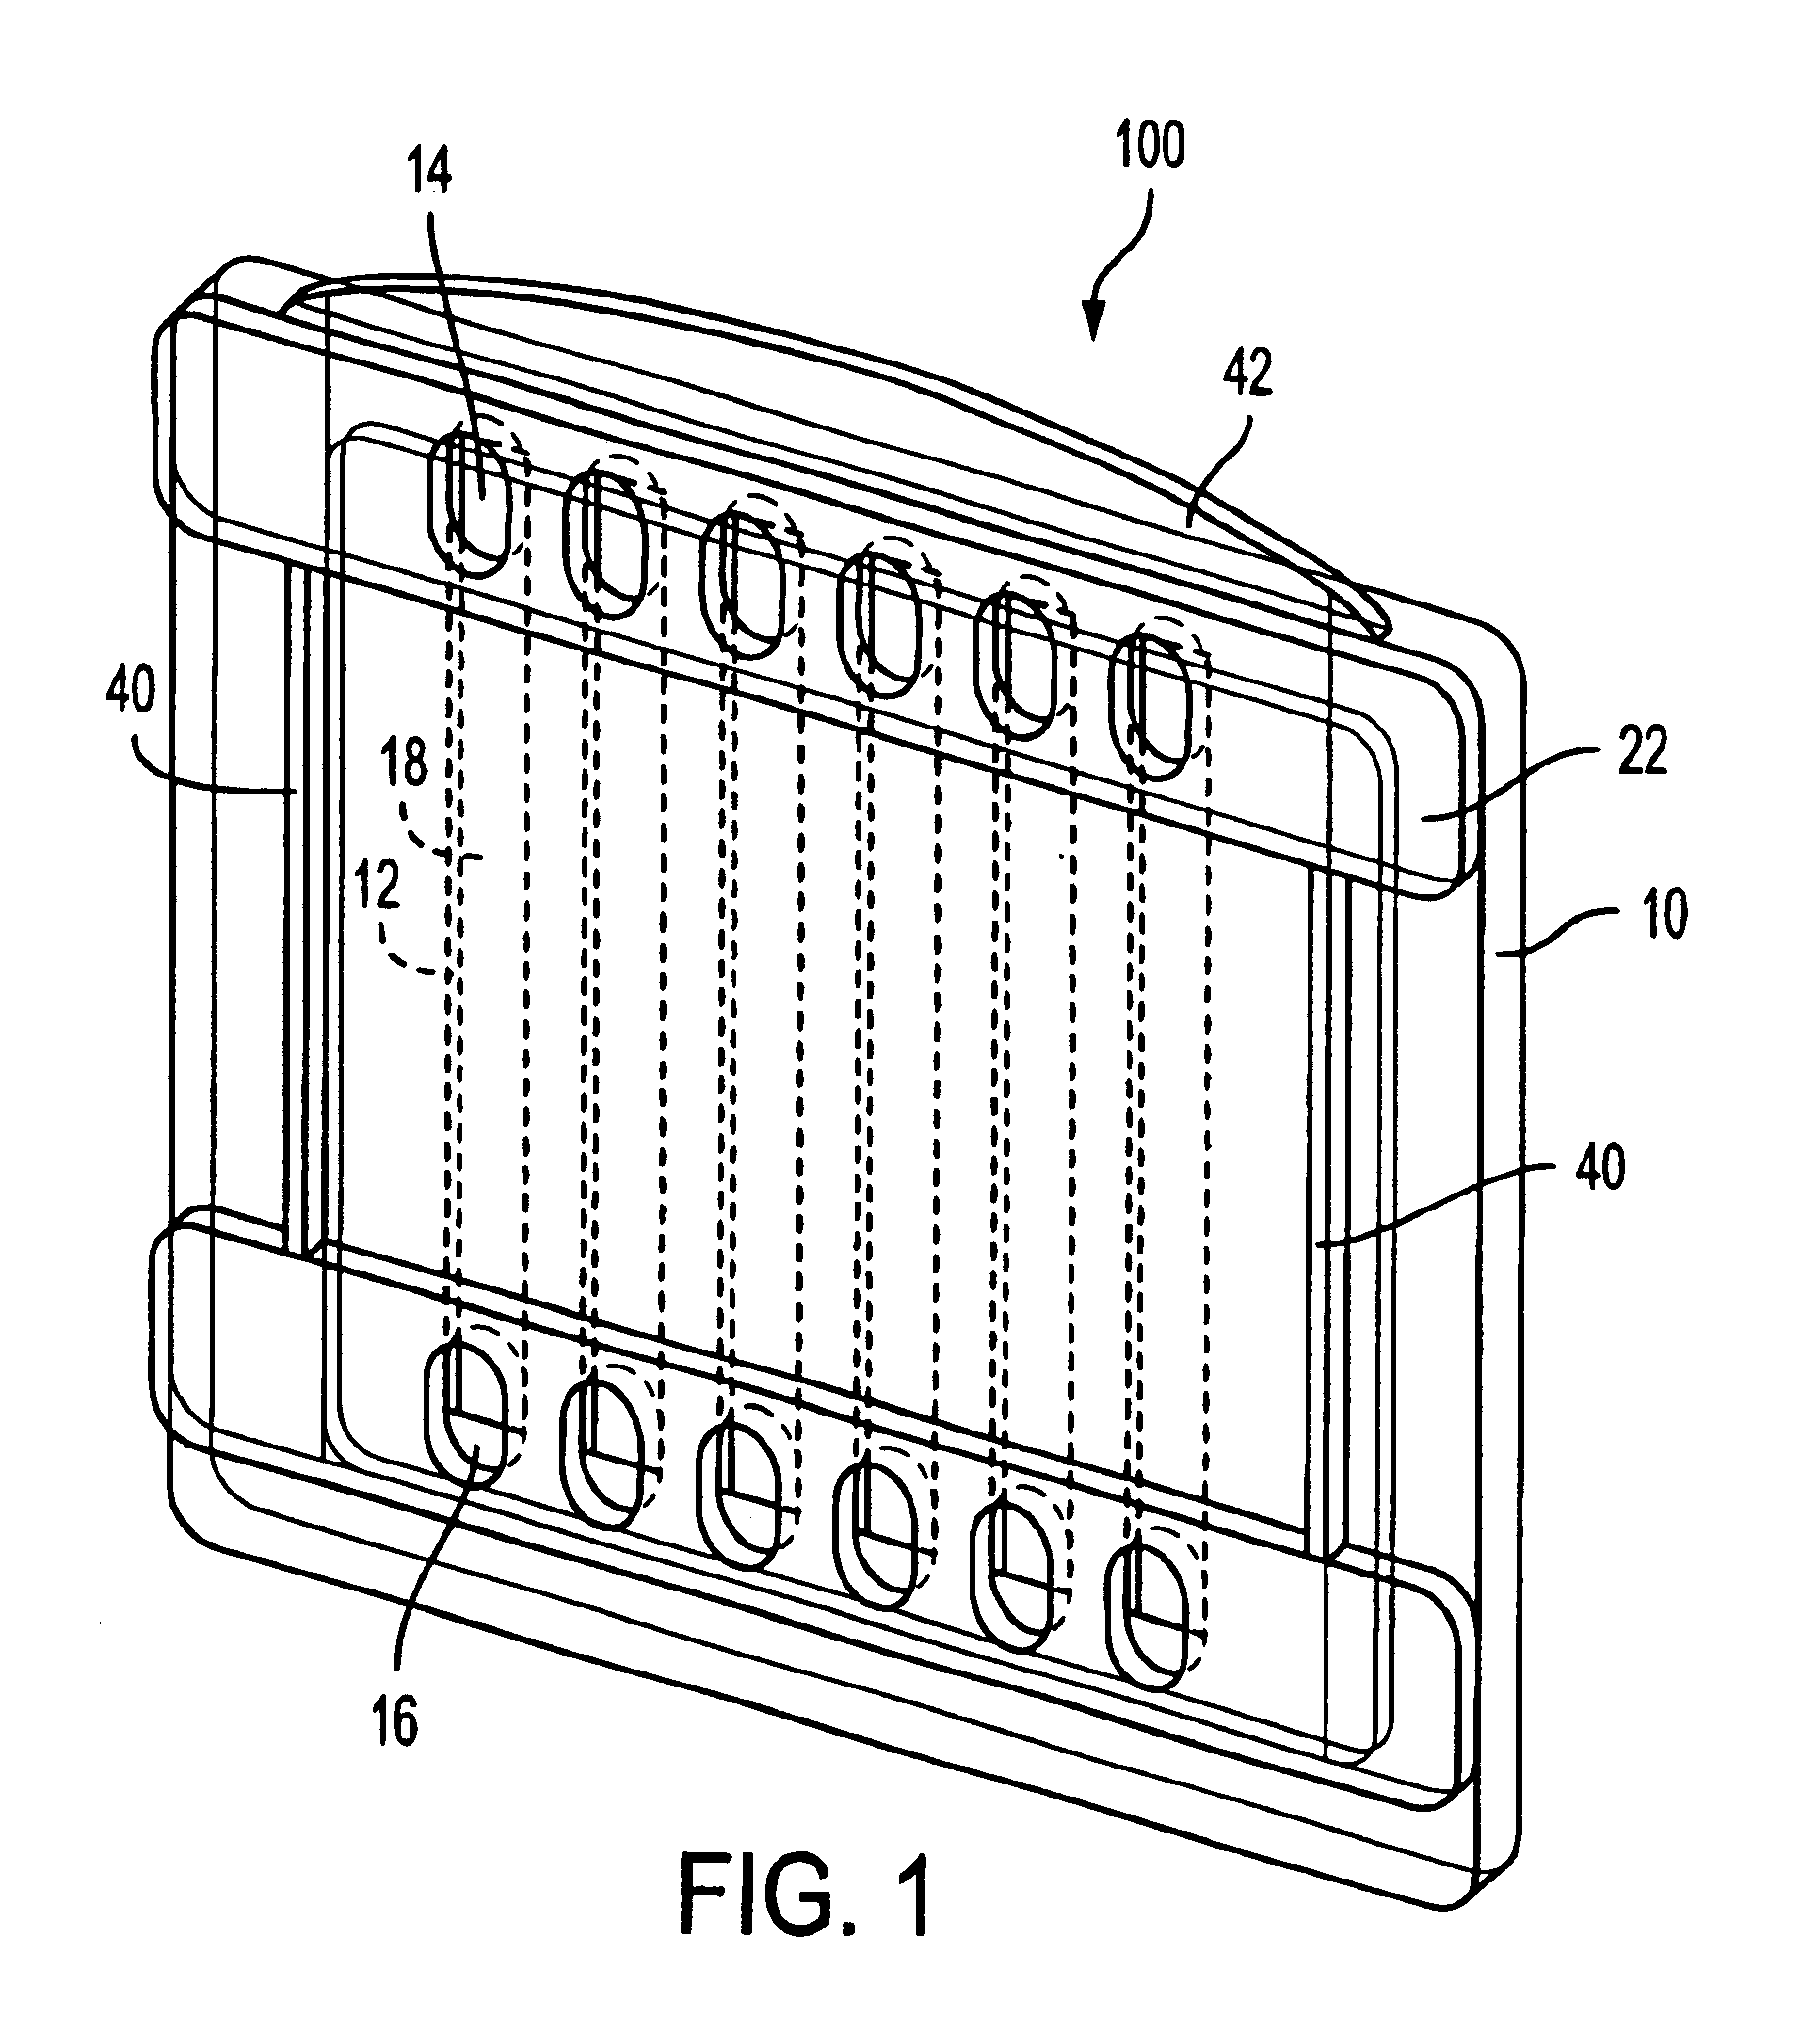 Methods and apparatus for electrophoresis of prior-cast, hydratable separation media